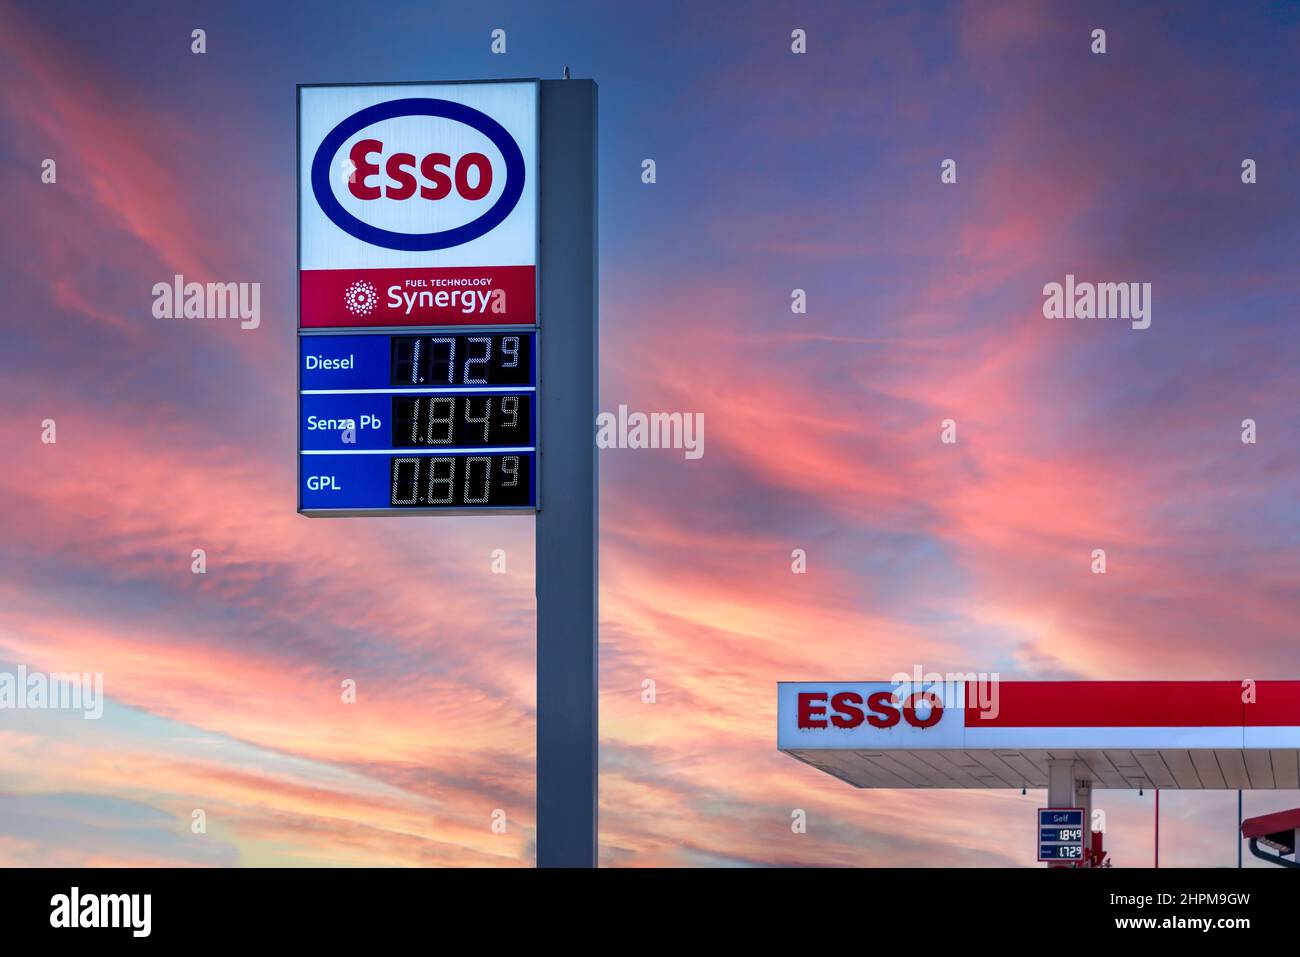 Fossano, Italy - February 22, 2022: Esso logo sign with fuel Euro price display on colorated sunset sky, Esso is a brand of the global oil industry gi Stock Photo